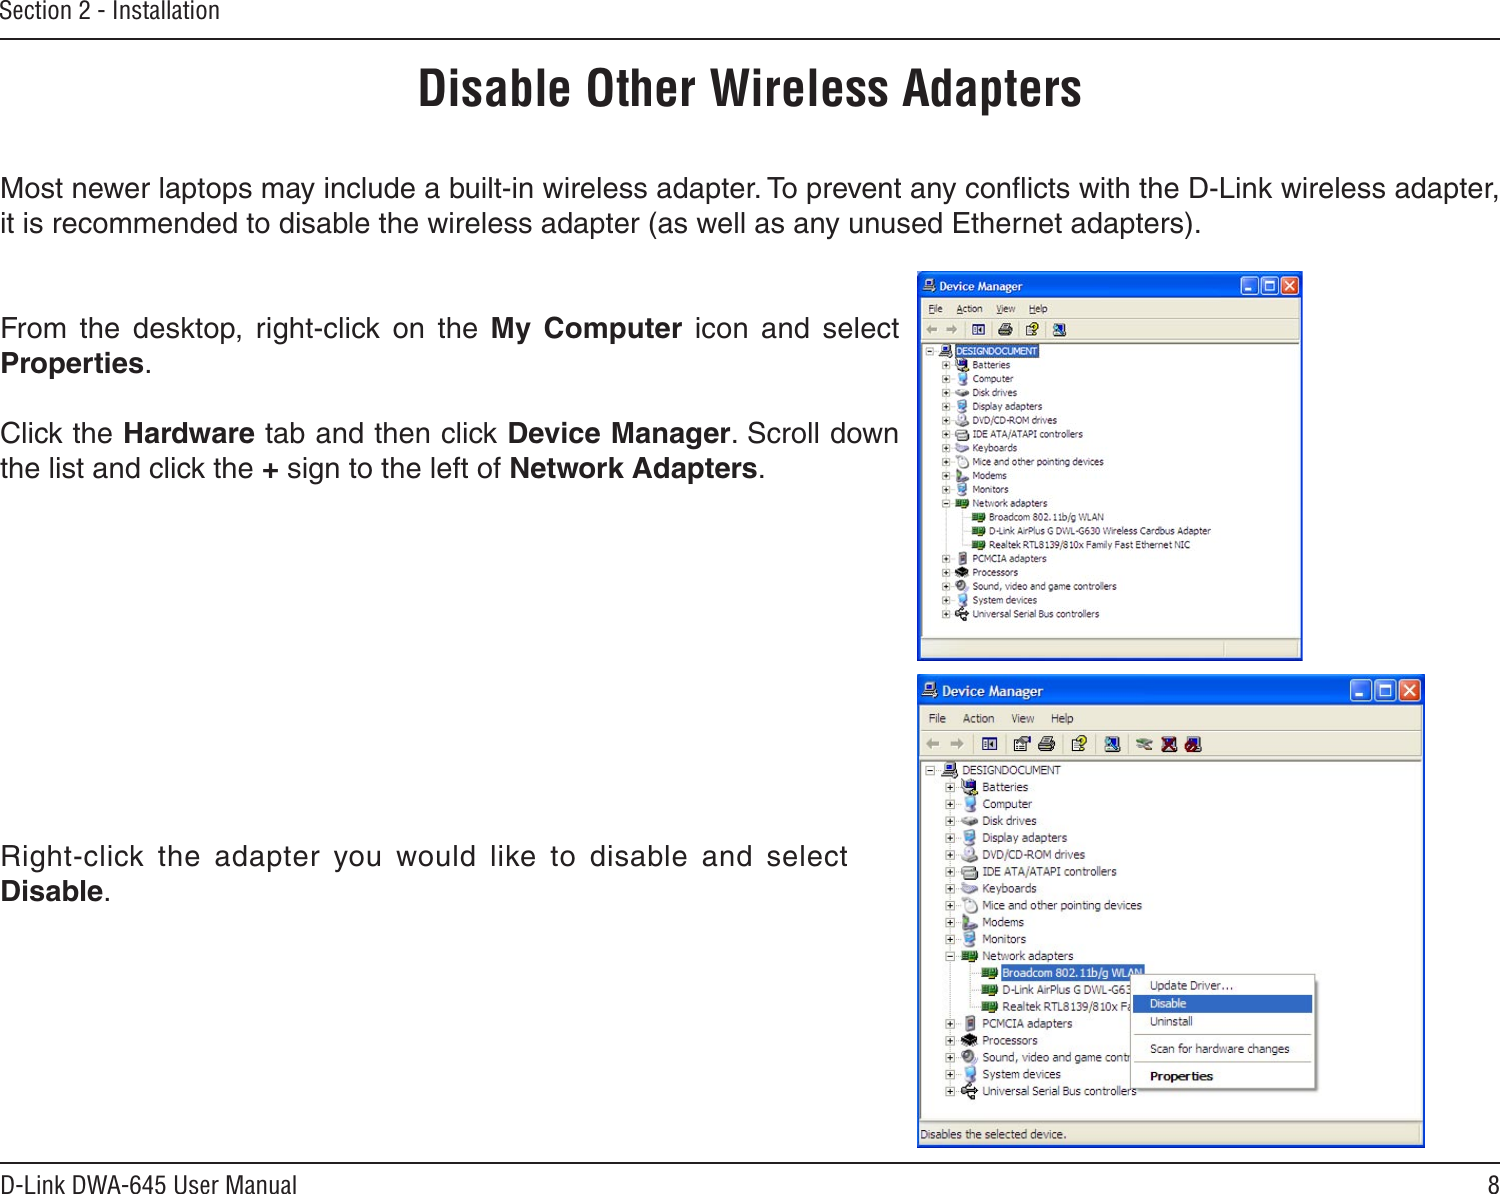 8D-Link DWA-645 User ManualSection 2 - InstallationDisable Other Wireless AdaptersMost newer laptops may include a built-in wireless adapter. To prevent any conﬂicts with the D-Link wireless adapter, it is recommended to disable the wireless adapter (as well as any unused Ethernet adapters).From  the  desktop,  right-click  on  the  My  Computer  icon  and  select Properties. Click the Hardware tab and then click Device Manager. Scroll down the list and click the + sign to the left of Network Adapters.Right-click  the  adapter  you  would  like  to  disable  and  select Disable.